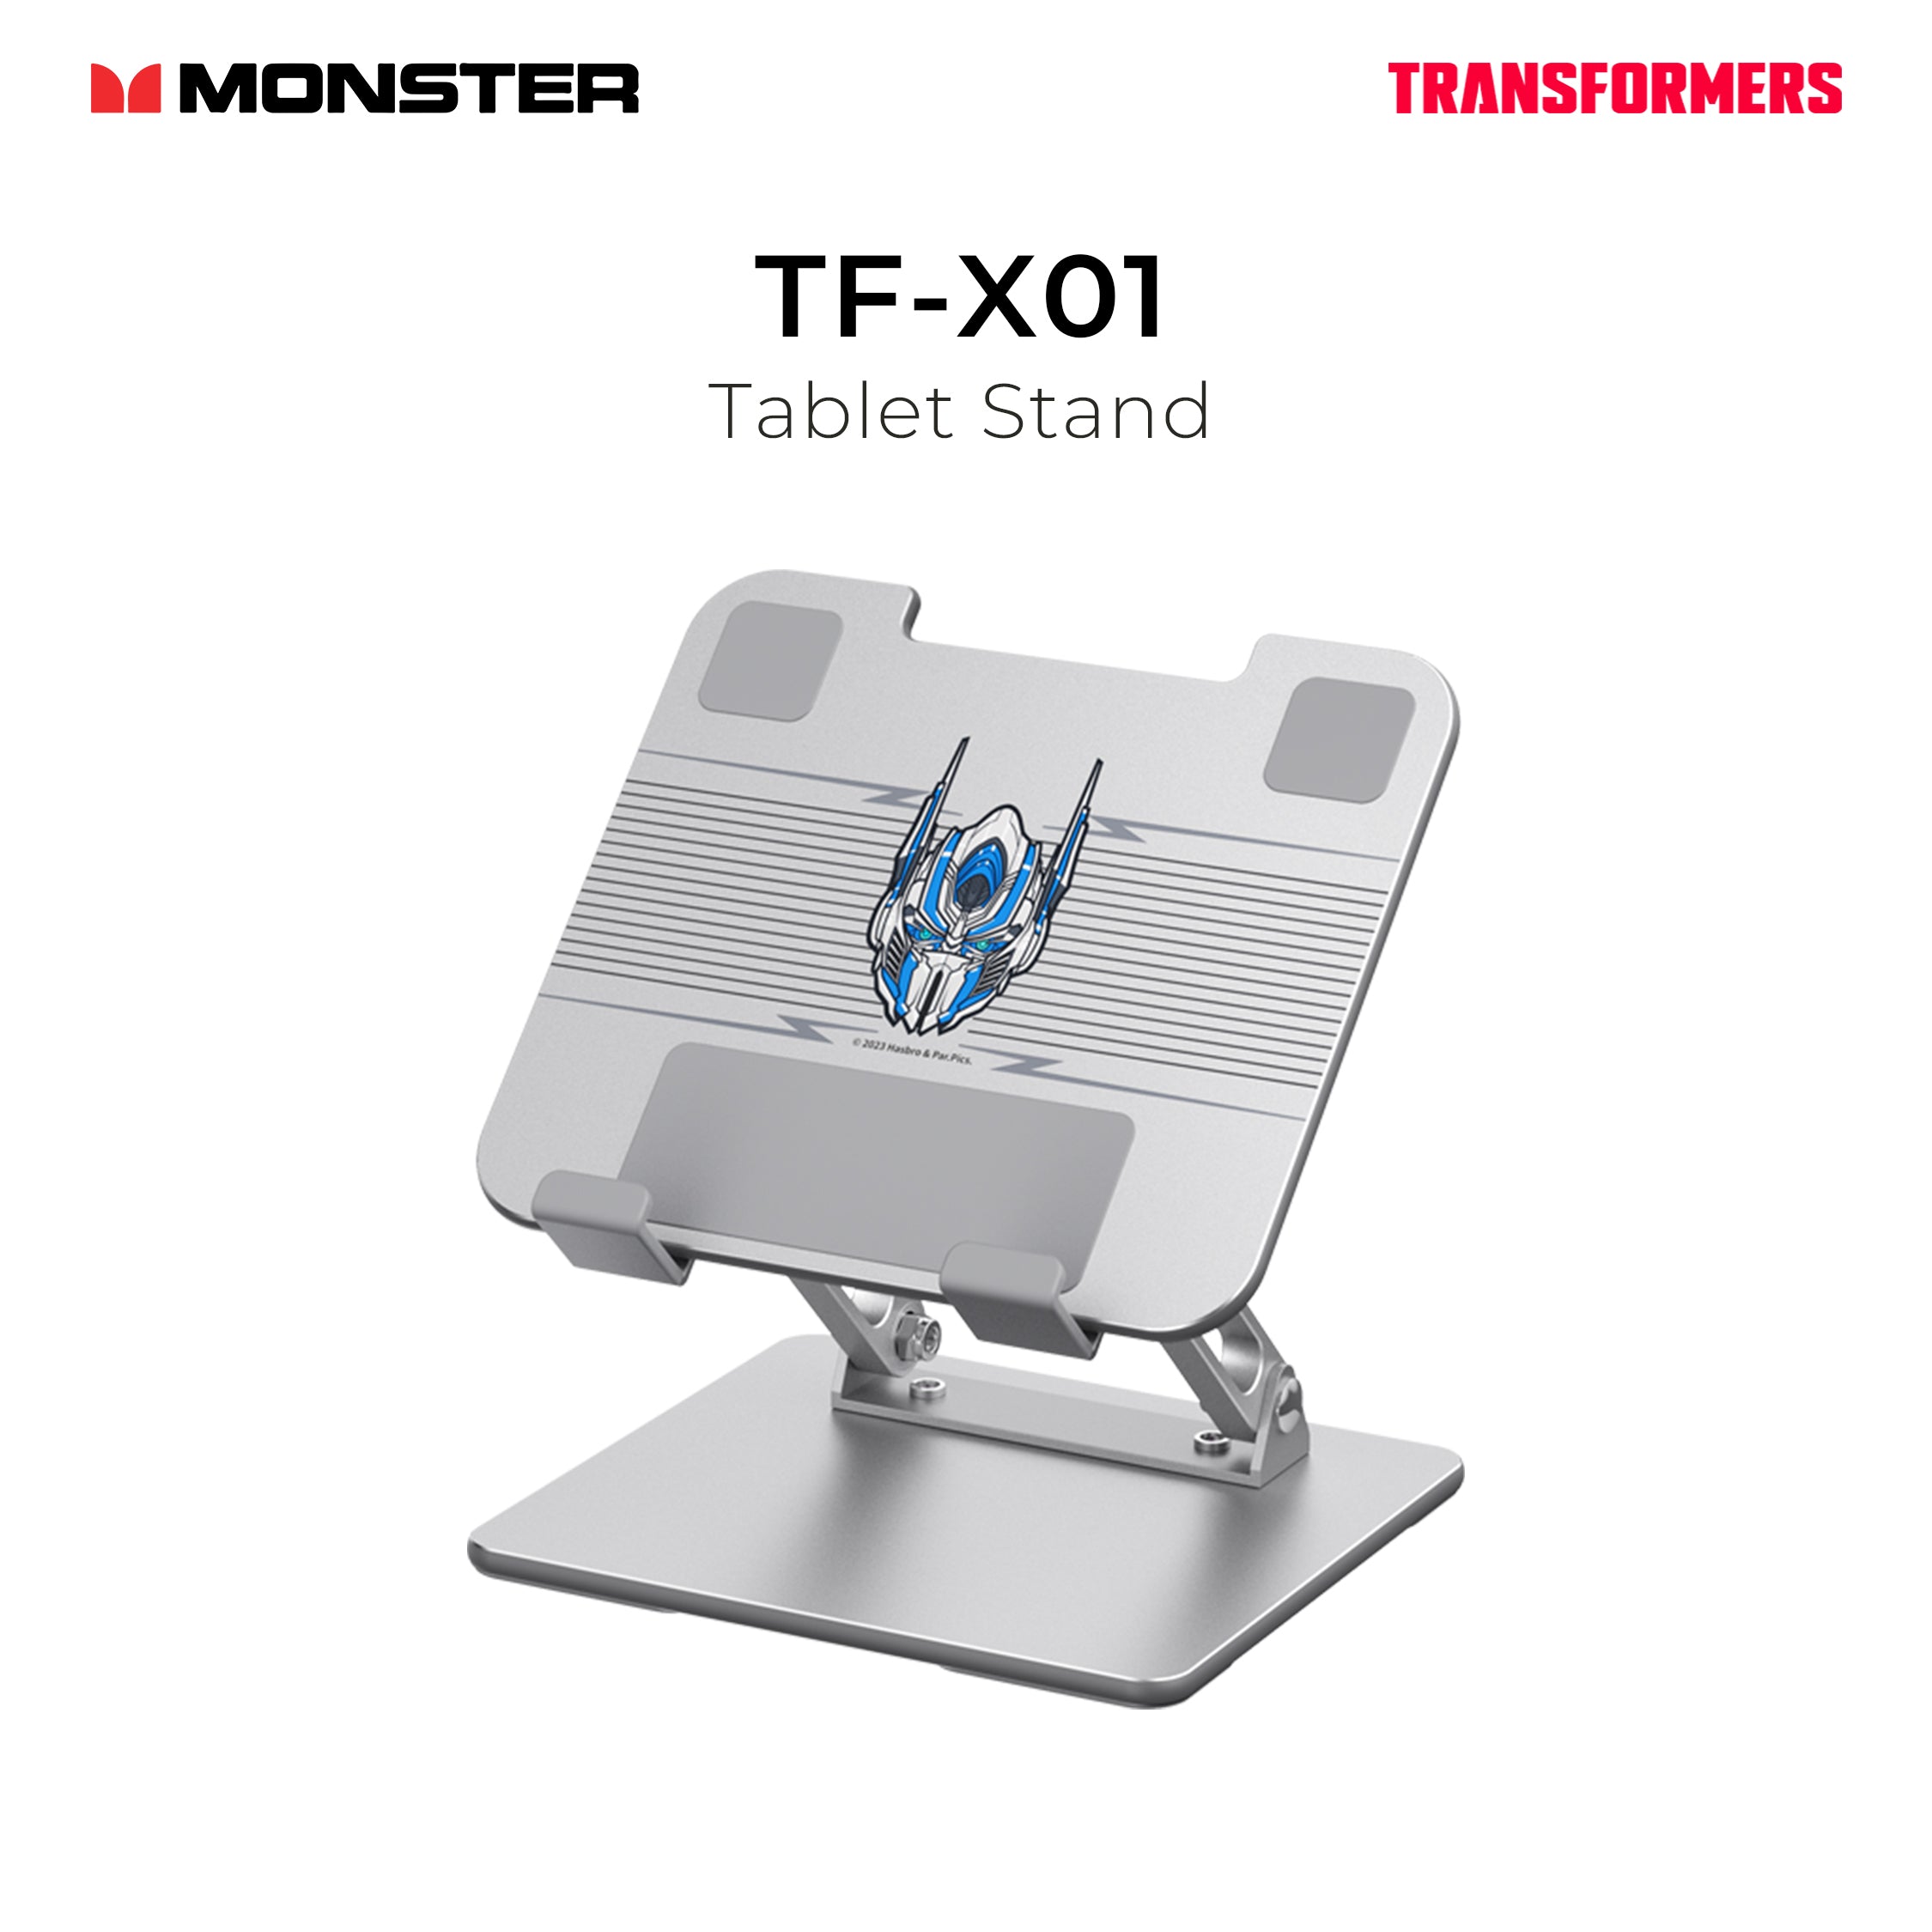 Monster Transformers Tablet Stand TF-X01